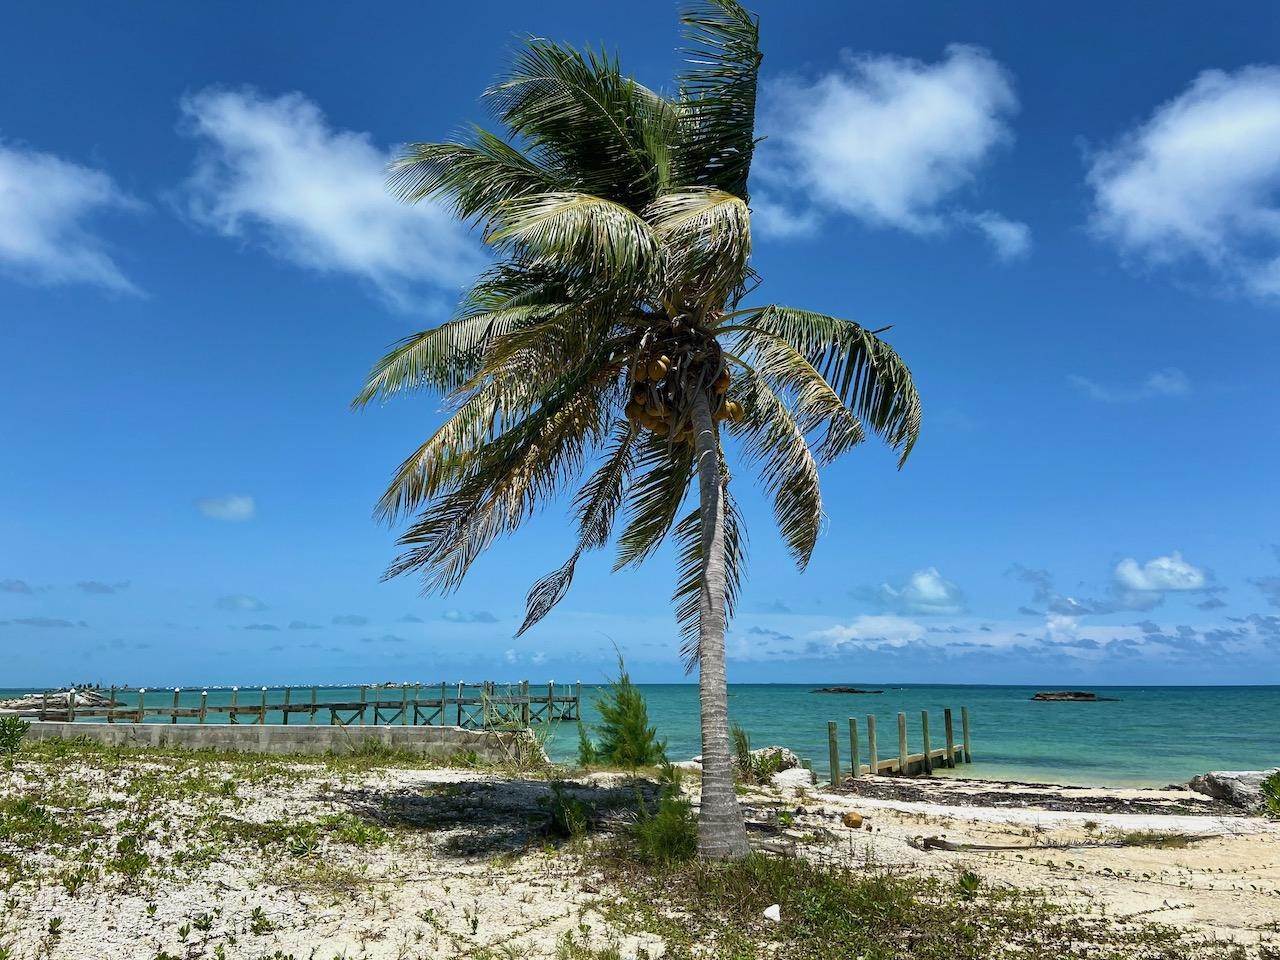 7. Land for Sale at Leisure Lee, Abaco Bahamas